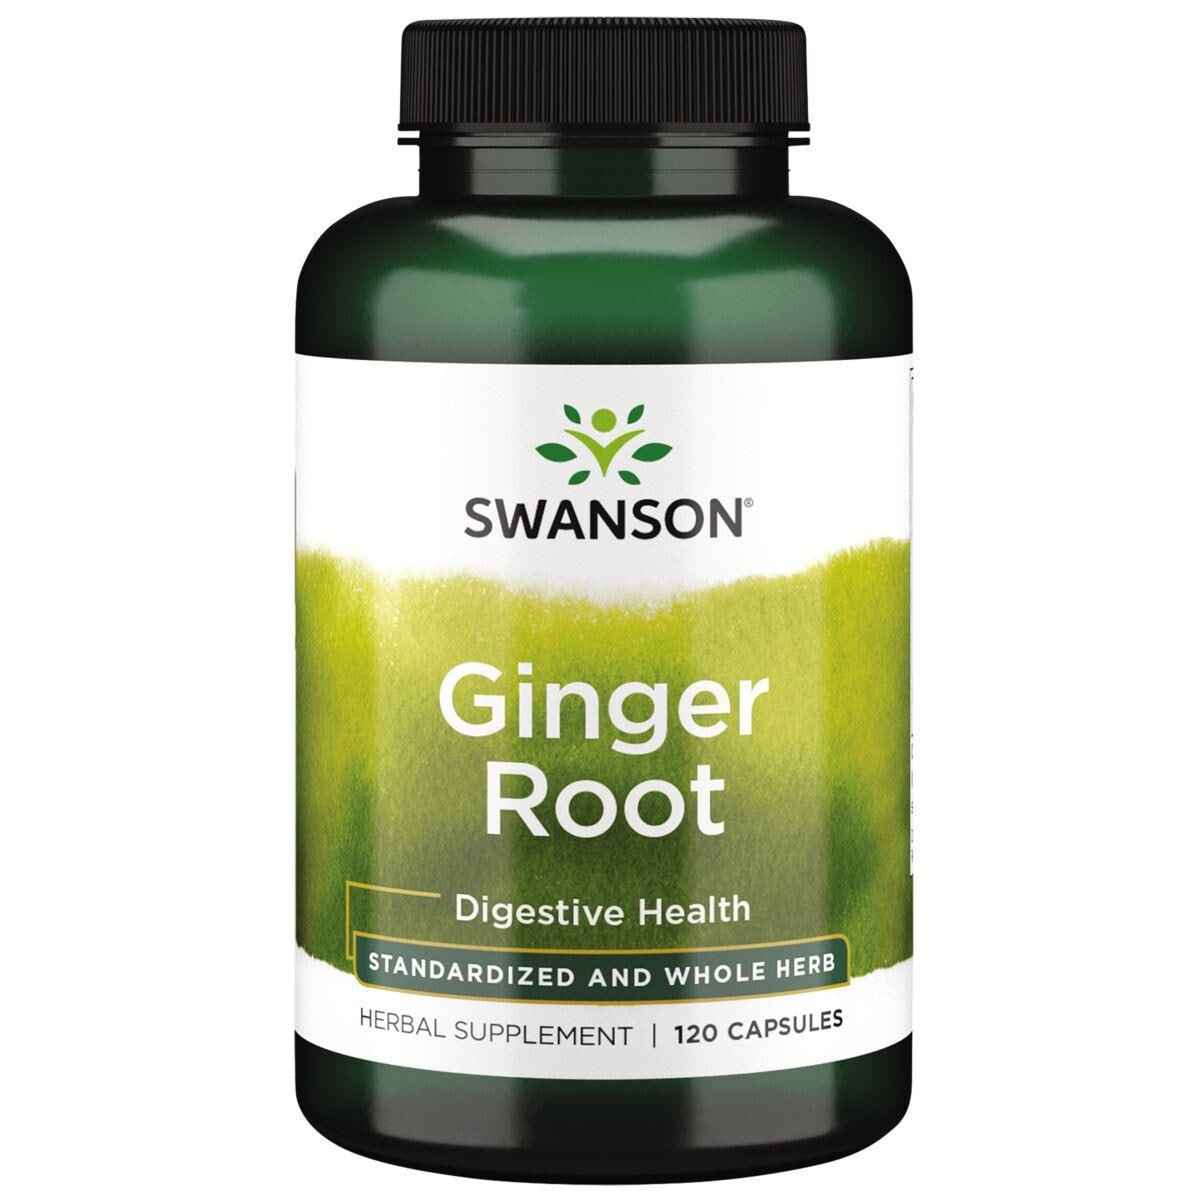 Swanson Superior Herbs Ginger Root - Standardized and Whole Herb Vitamin | 120 Caps